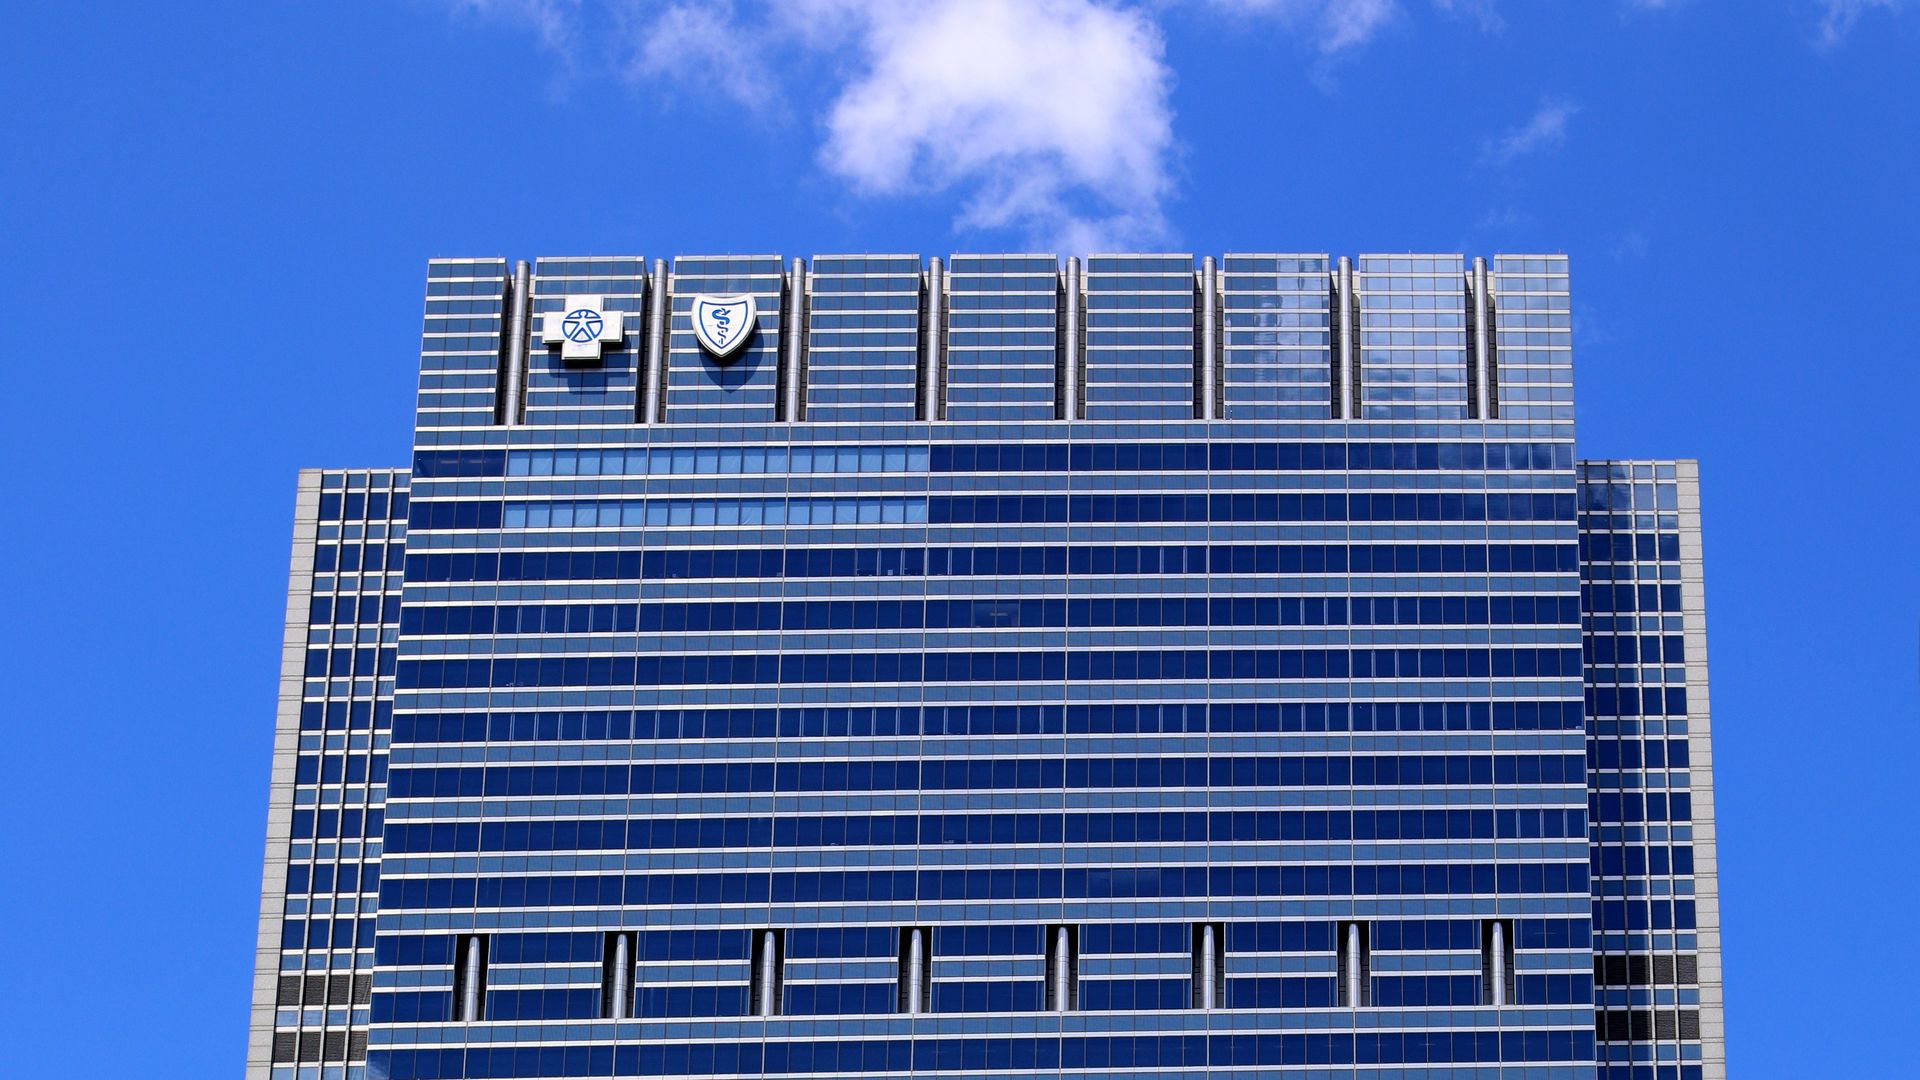 The Blue Cross Blue Shield logo on a building in Chicago.